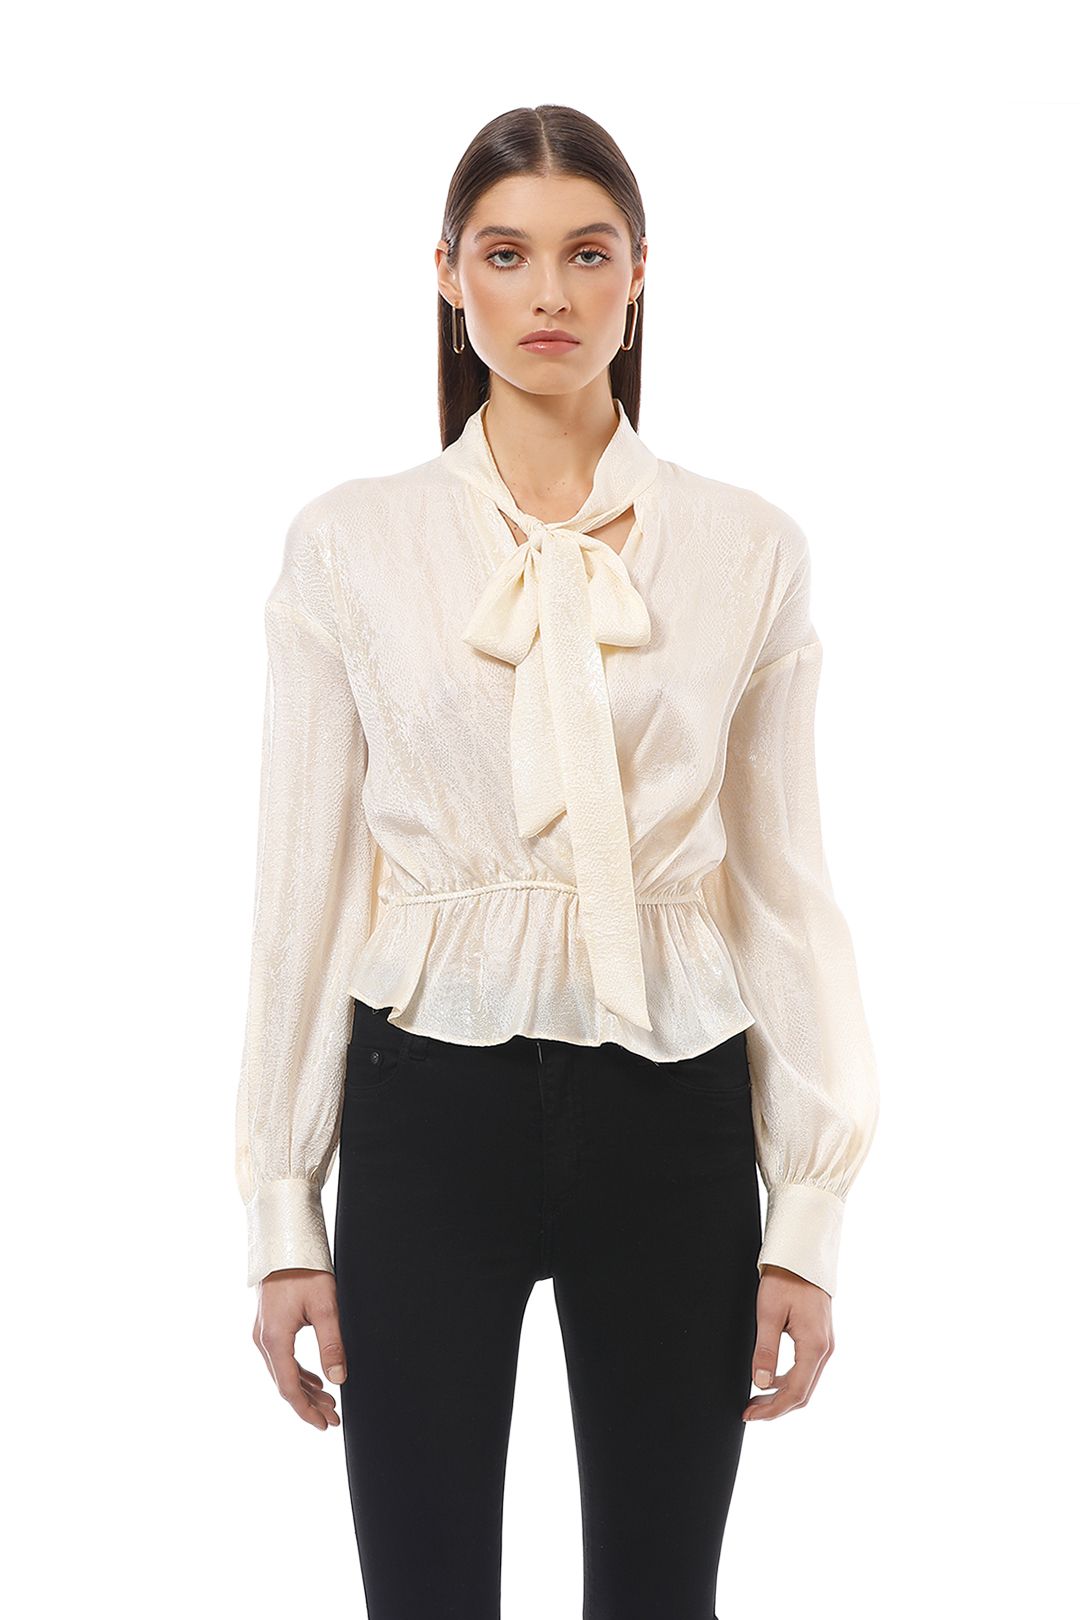 Manning Cartell - Up Scale Blouse - Cream - Close Up